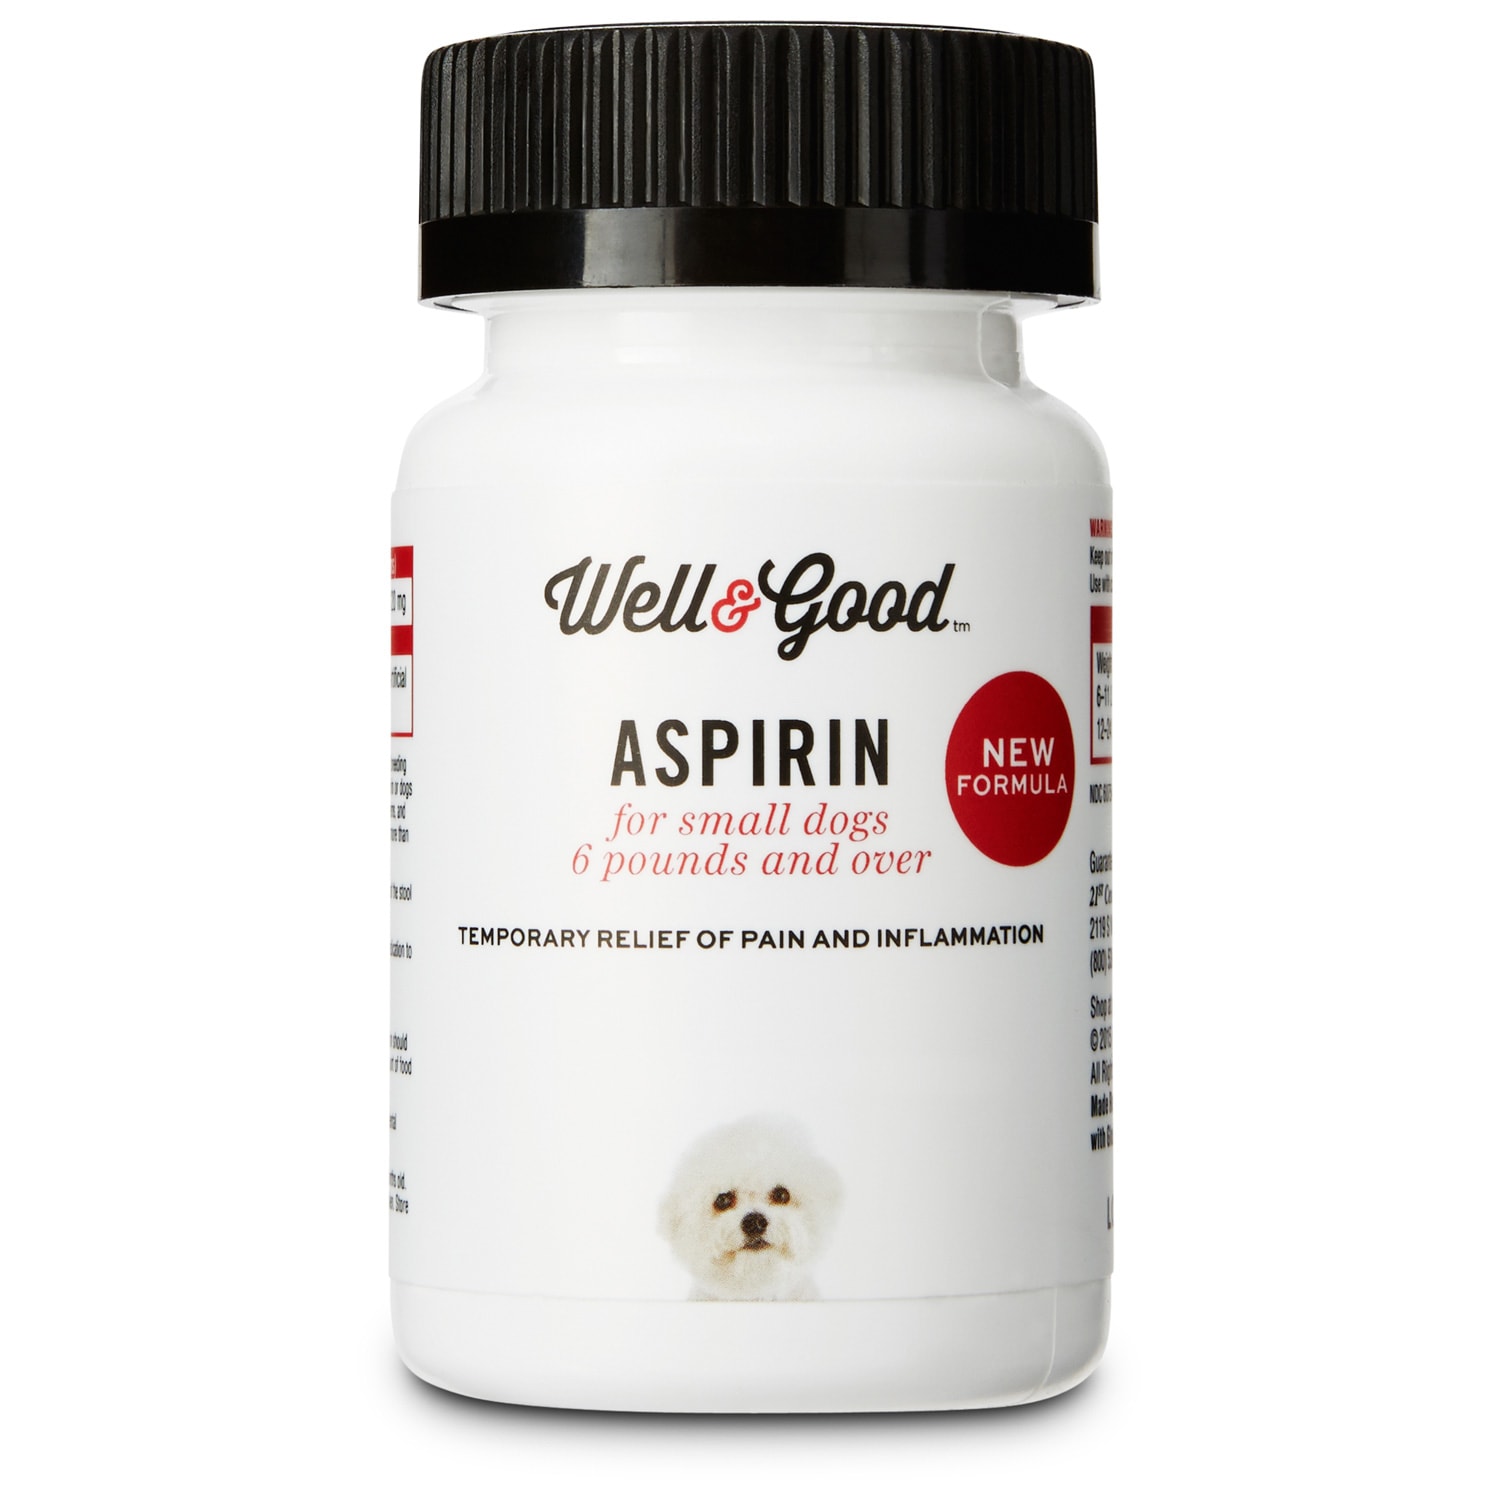 Can You Give Your Dog Baby Aspirin For Arthritis Well Good Buffered Dog Aspirin 75 Tablets For Small Dogs Petco